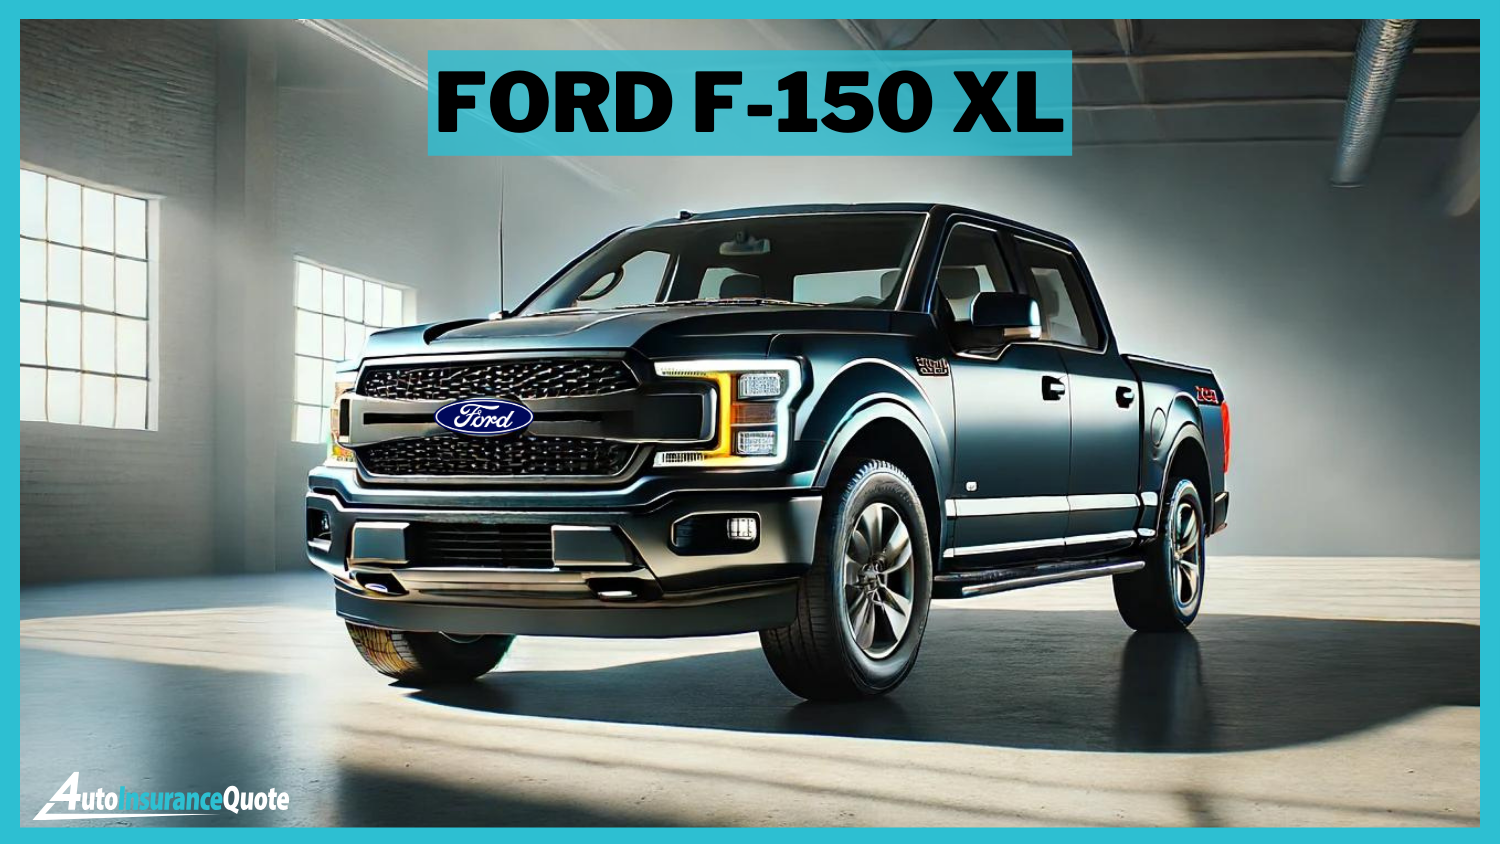 Ford F-150 XL: Cheapest Cars for 17-Year-Olds to Insure